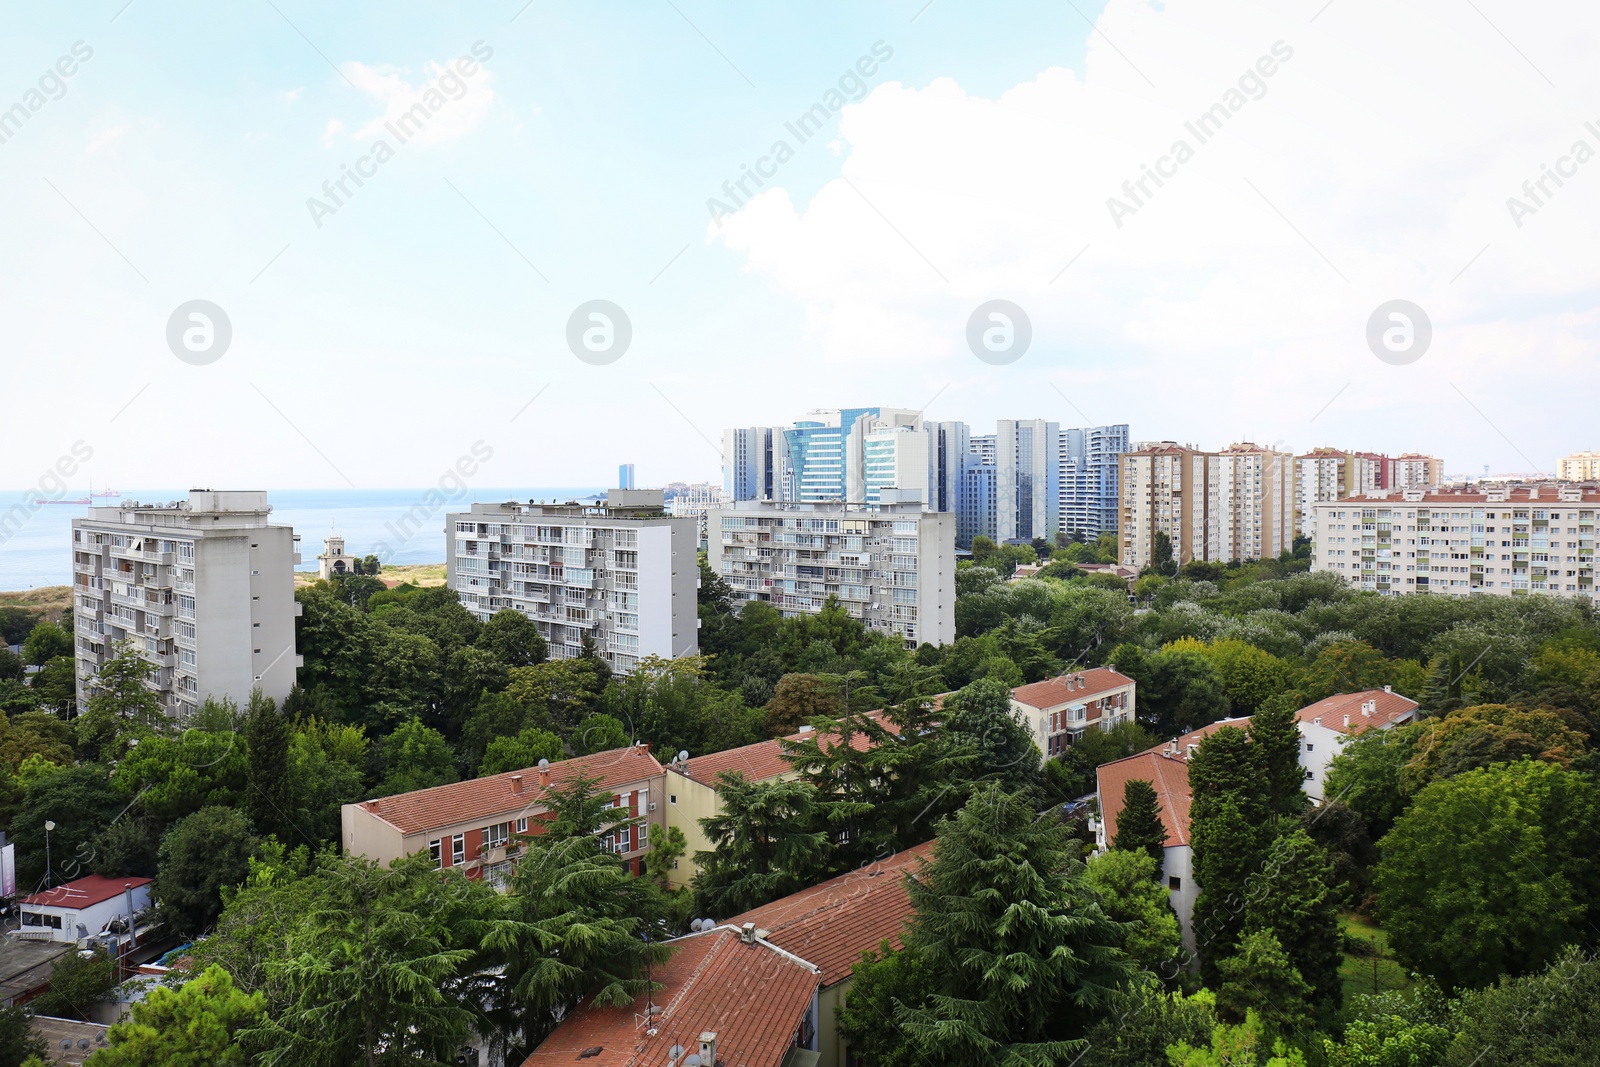 Photo of Picturesque view of city with beautiful buildings near sea